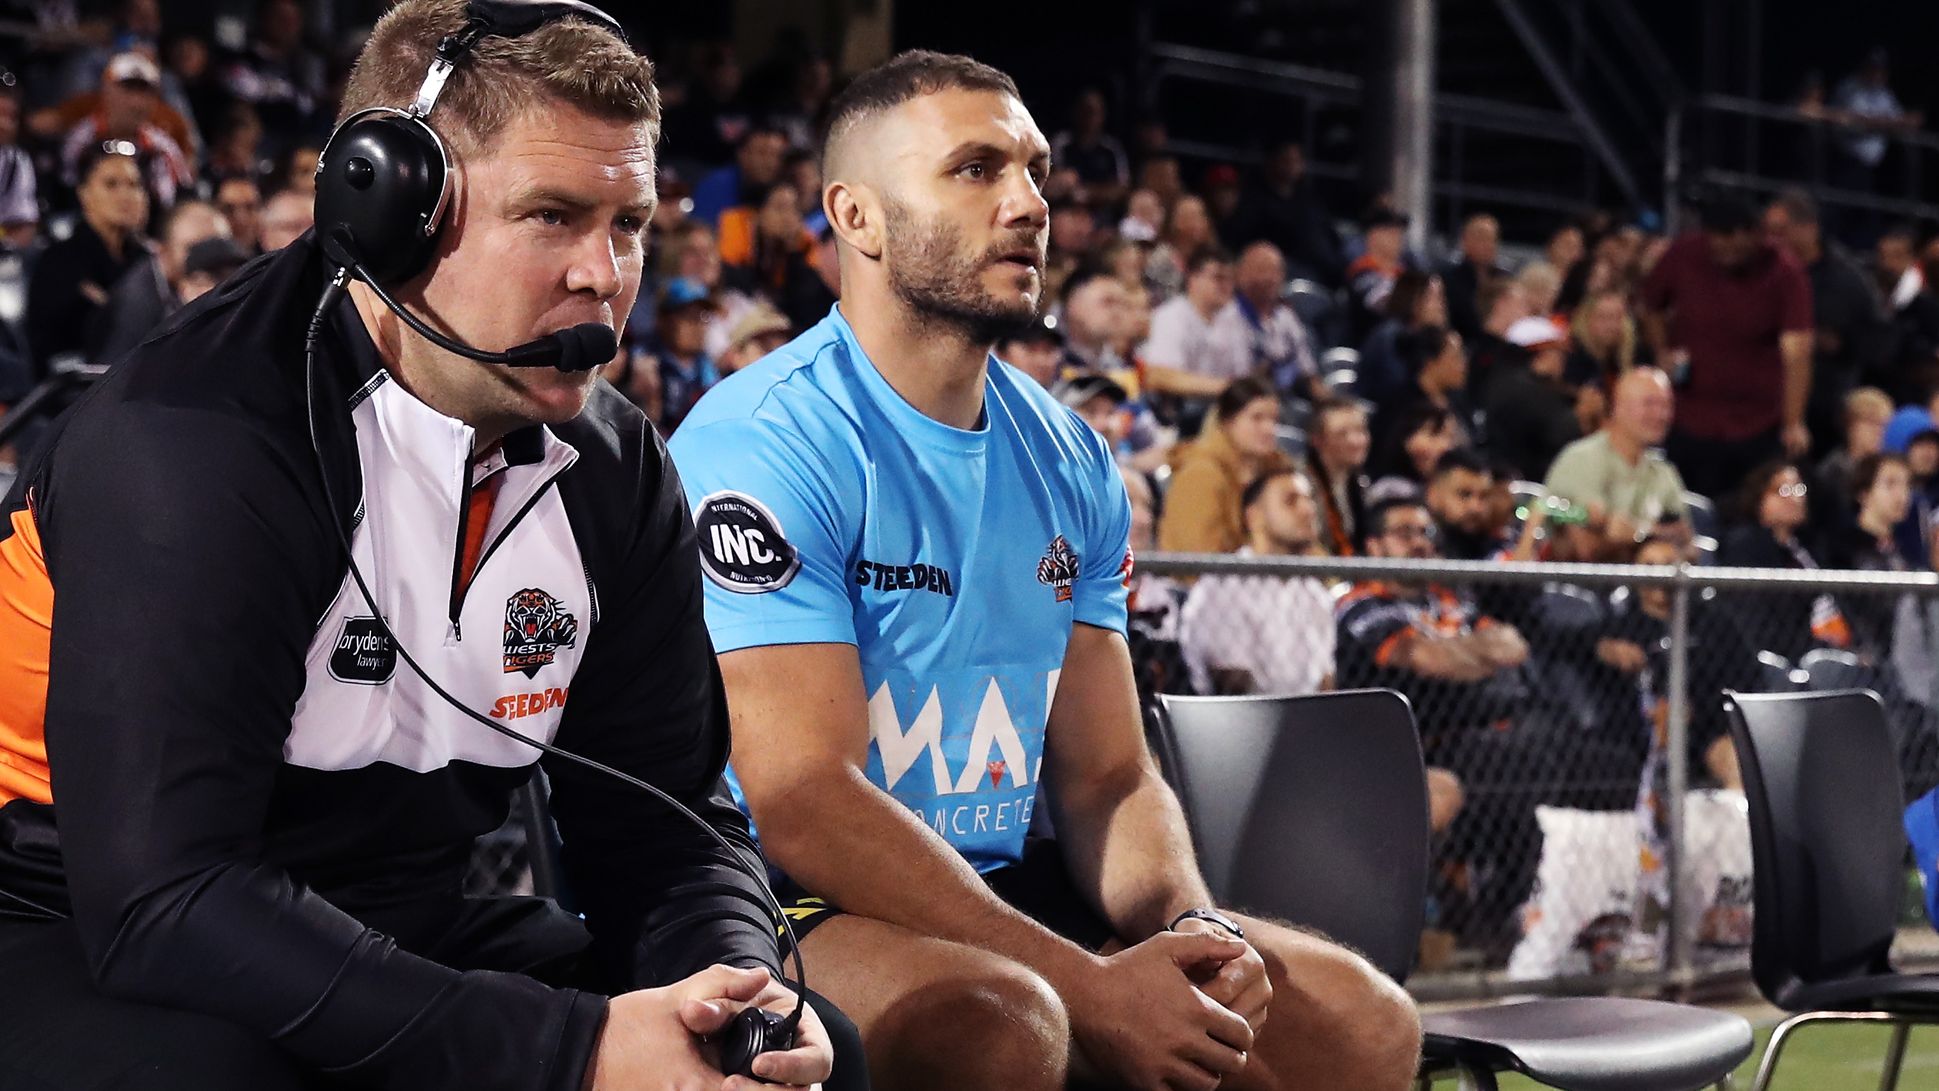 Robbie Farah and other Tigers support staff watch from the bench.